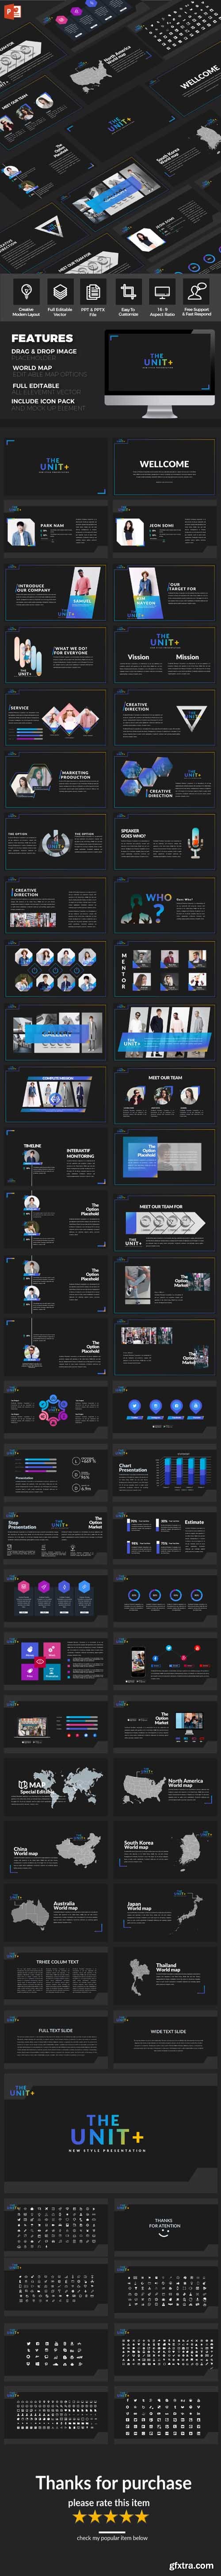 GR - The Unit - Multipurpose PowerPoint Template 21037533